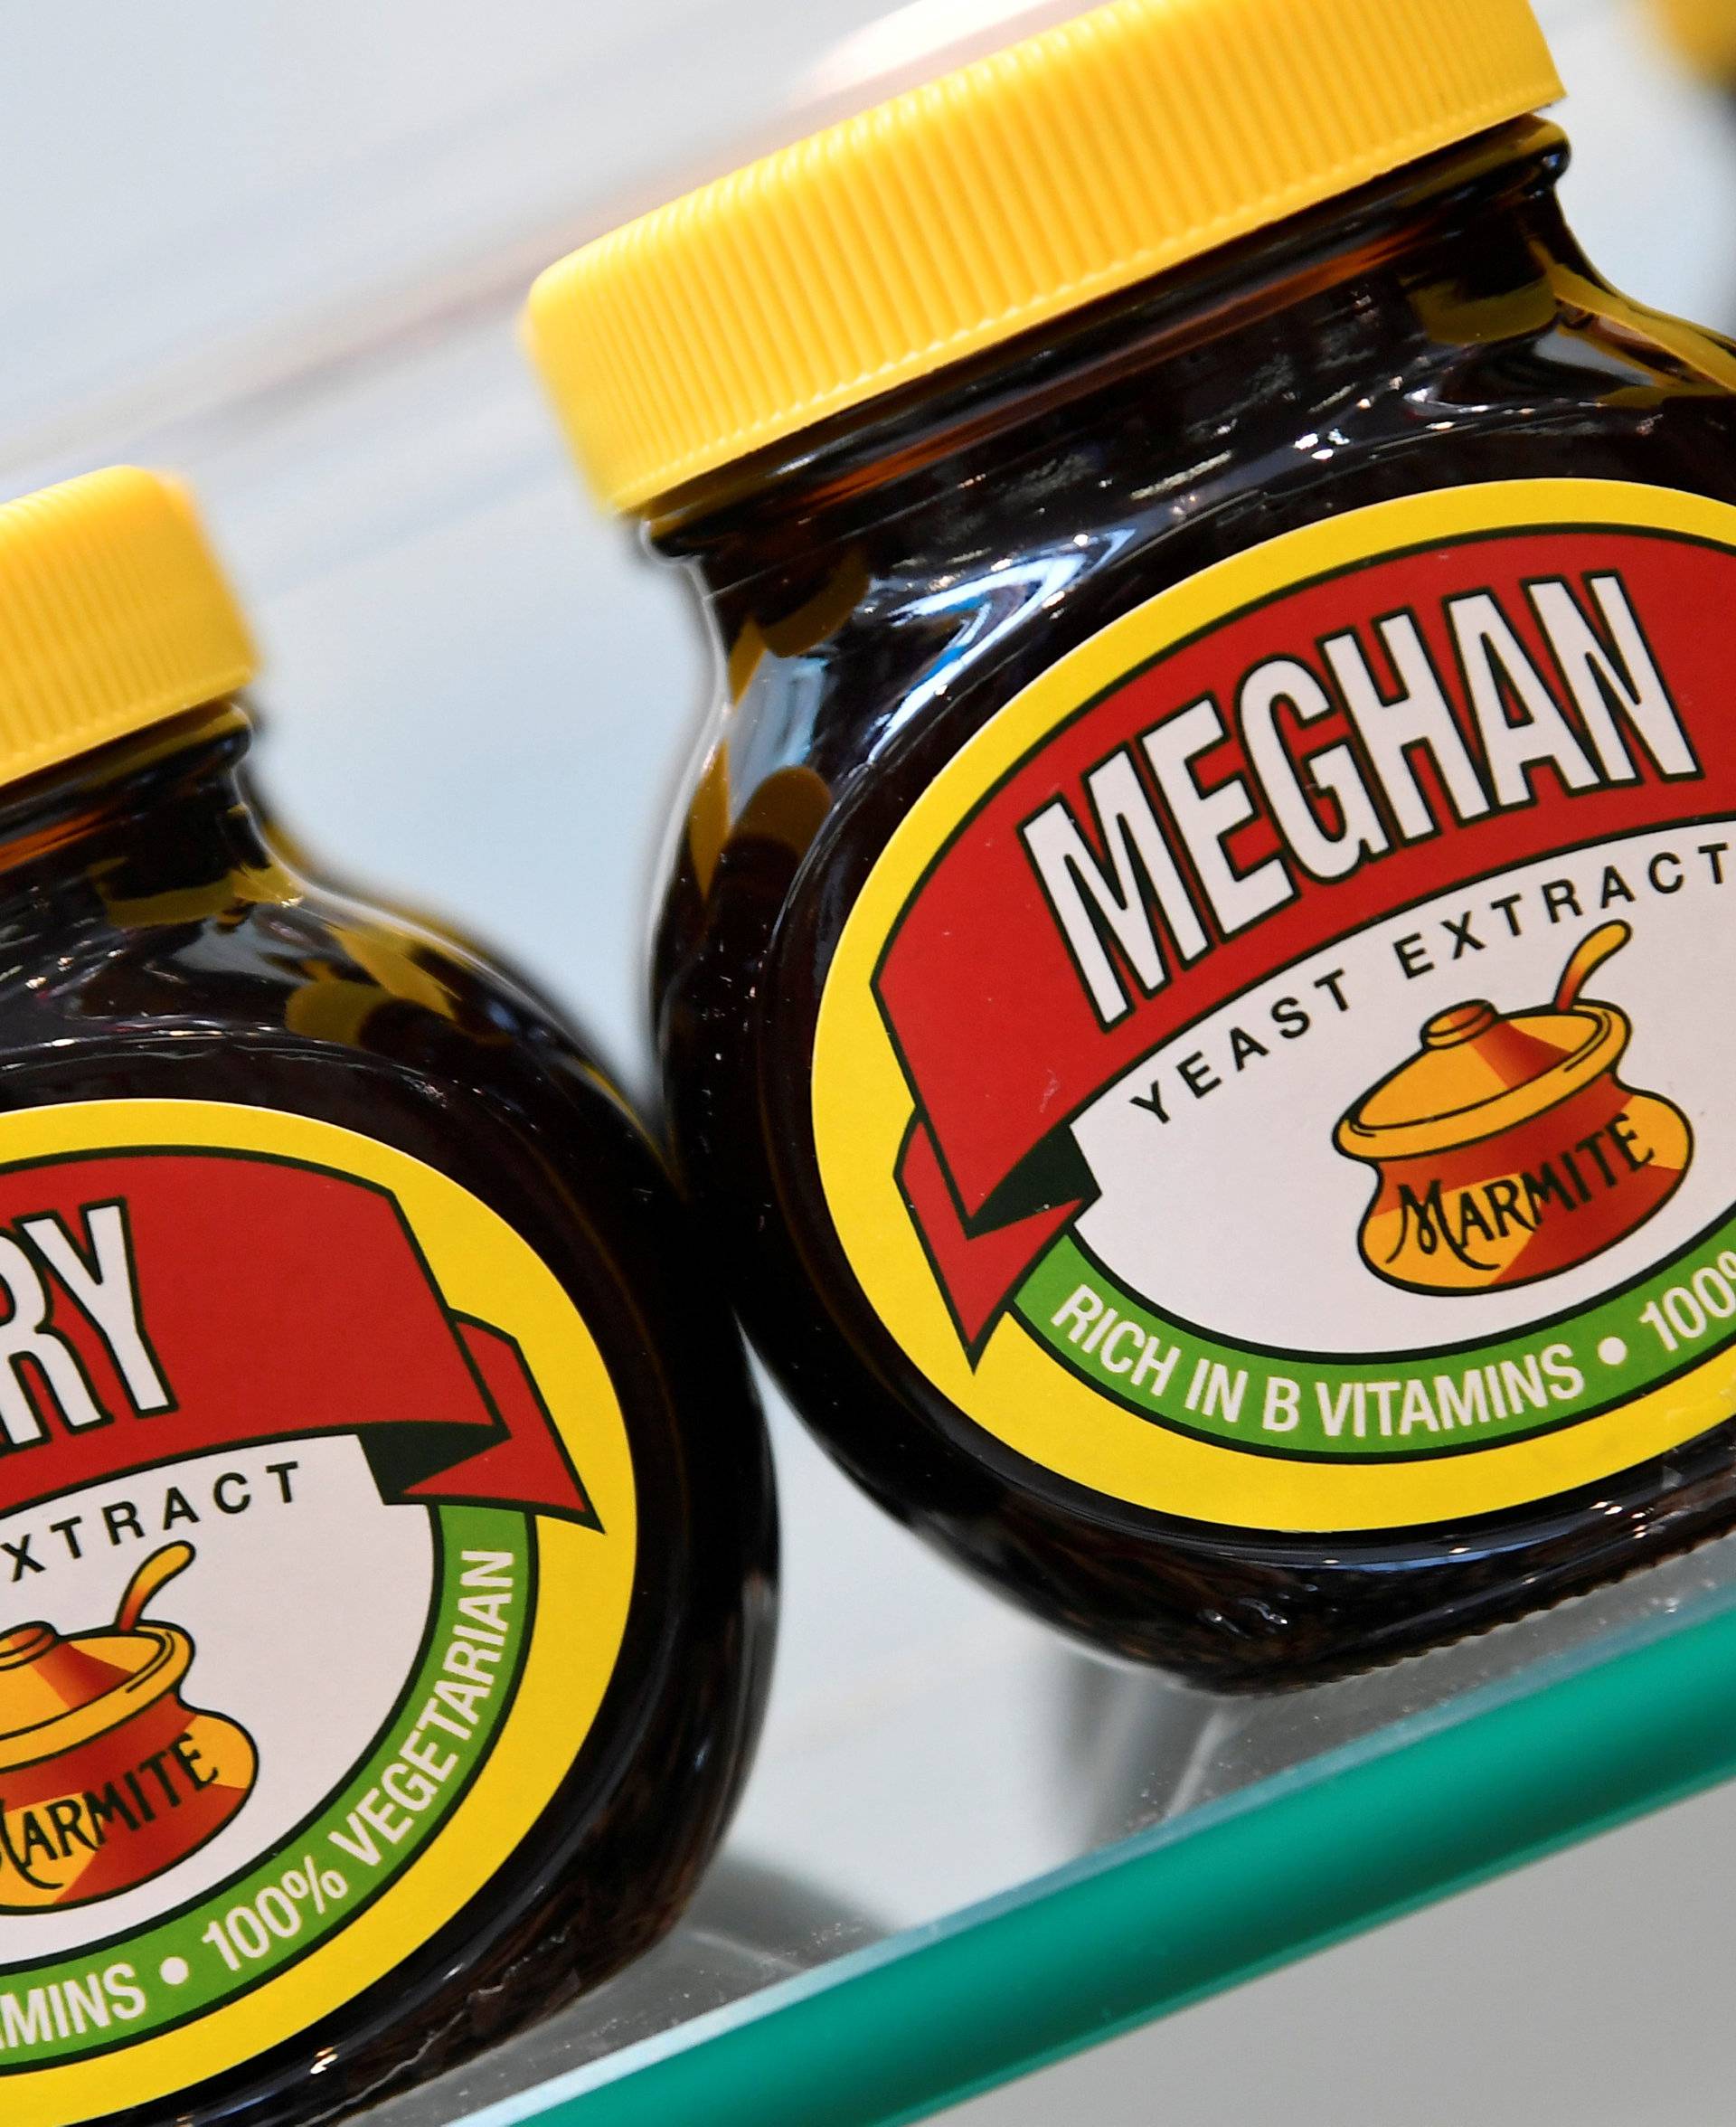 A shelf display of Marmite spread with a redesigned label for the forthcoming wedding of Britain's Prince Harry and his fiancee Meghan Markle is seen in Windsor, Britain,